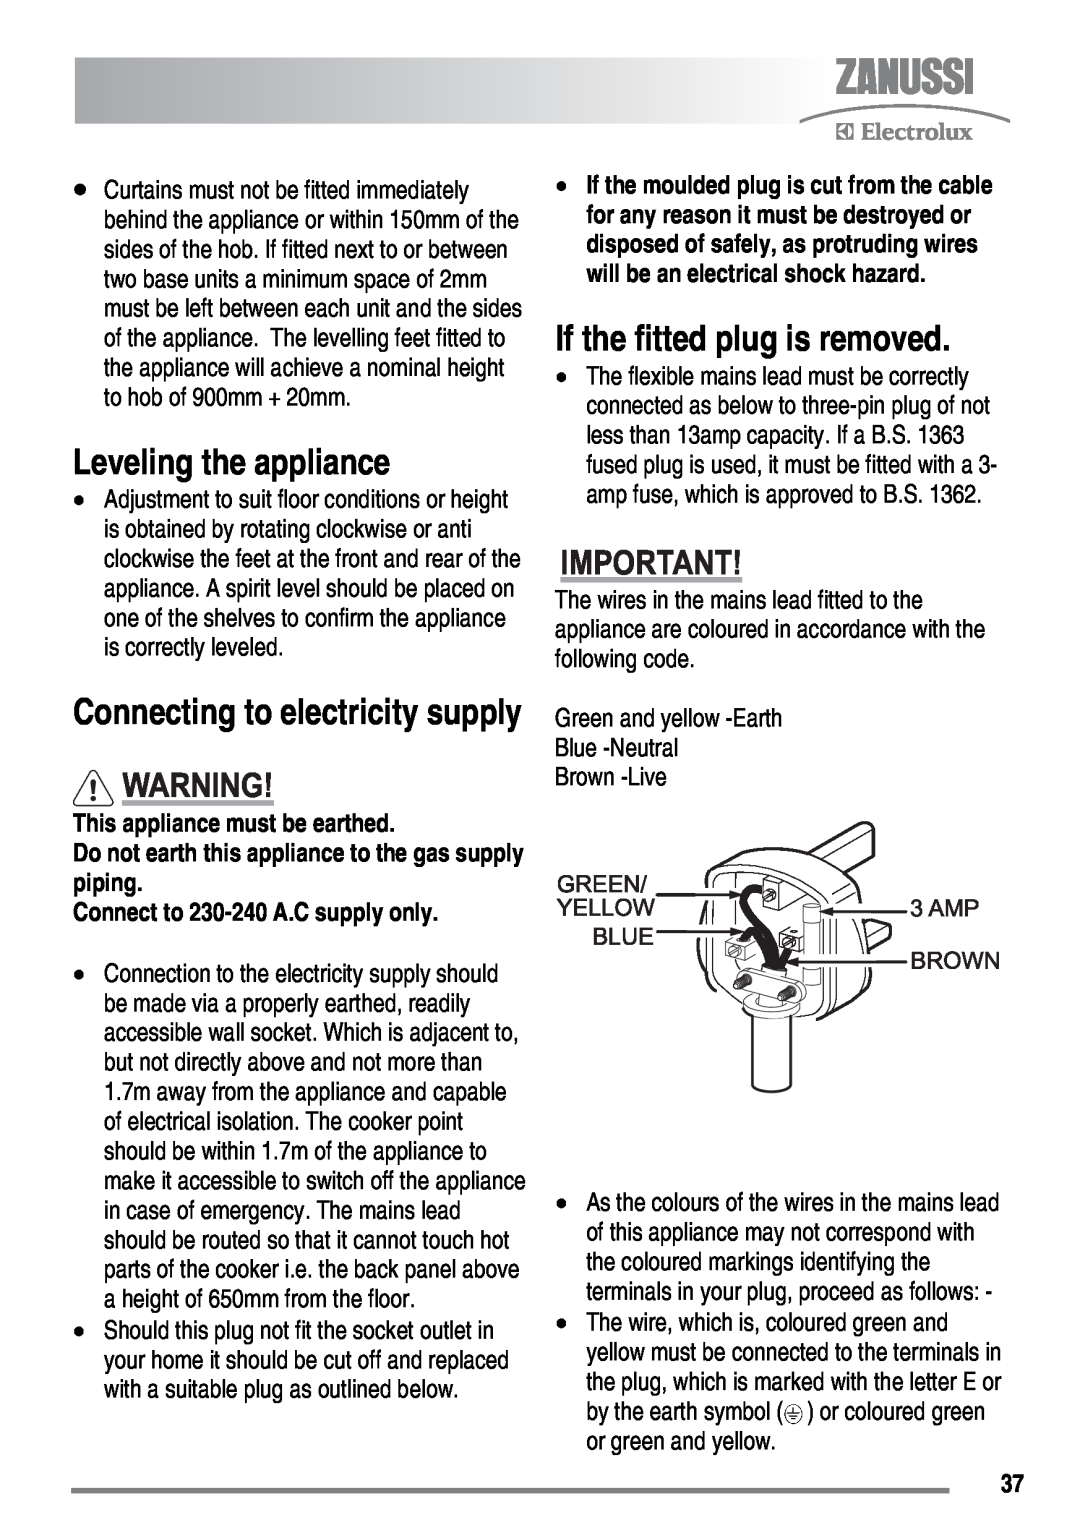 Zanussi ZKG6040 user manual Leveling the appliance, If the fitted plug is removed, Connecting to electricity supply 